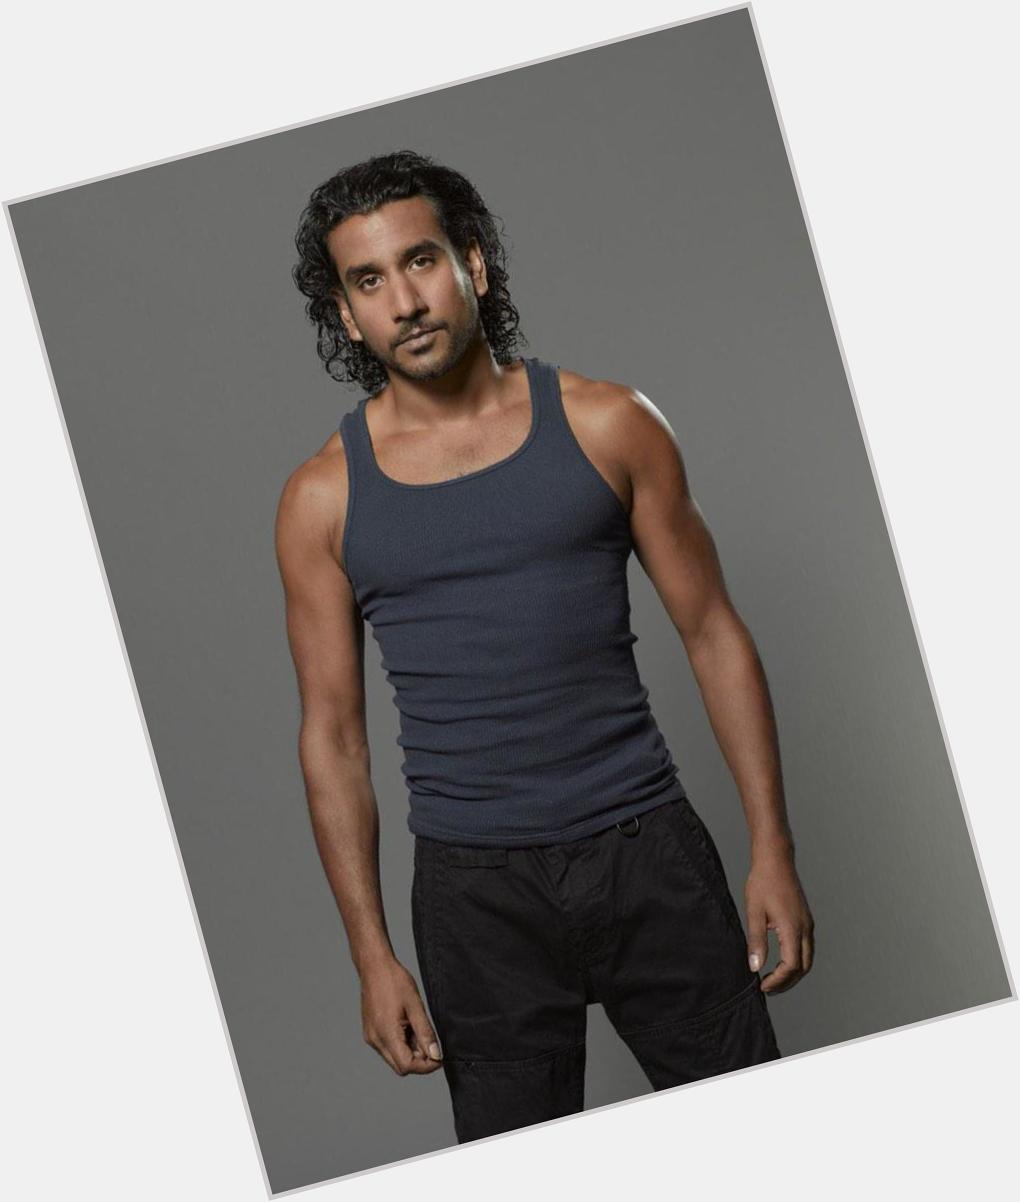 Happy Belated Birthday to Naveen Andrews who played the great Sayid Jarrah. 